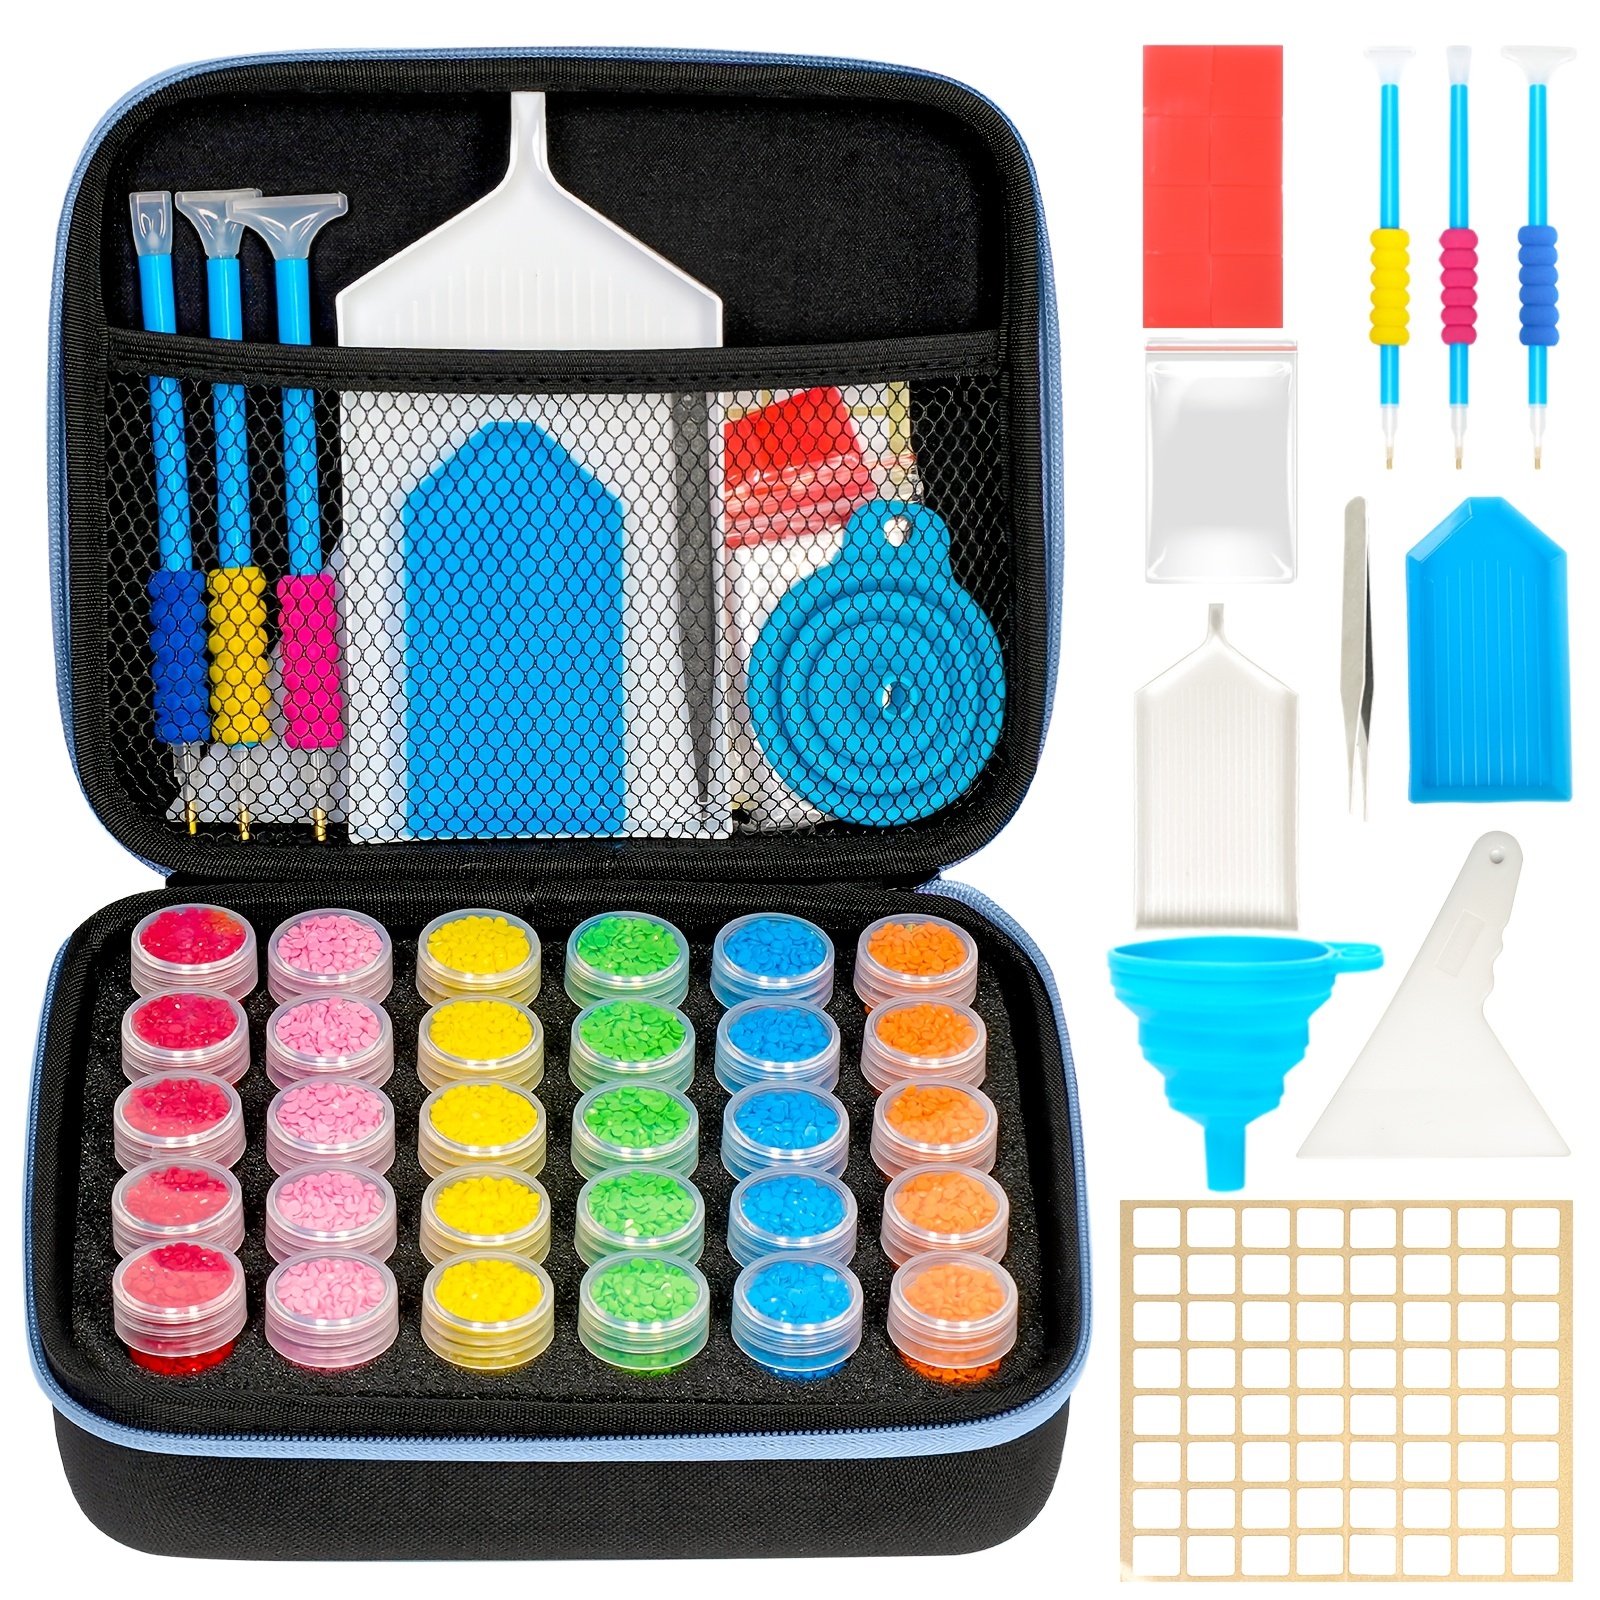 ARTDOT Diamond Painting Storage Containers, 30 Slots Diamond Painting Kits  Accessories and Tools Portable Diamond Painting Organizer Case for 5D